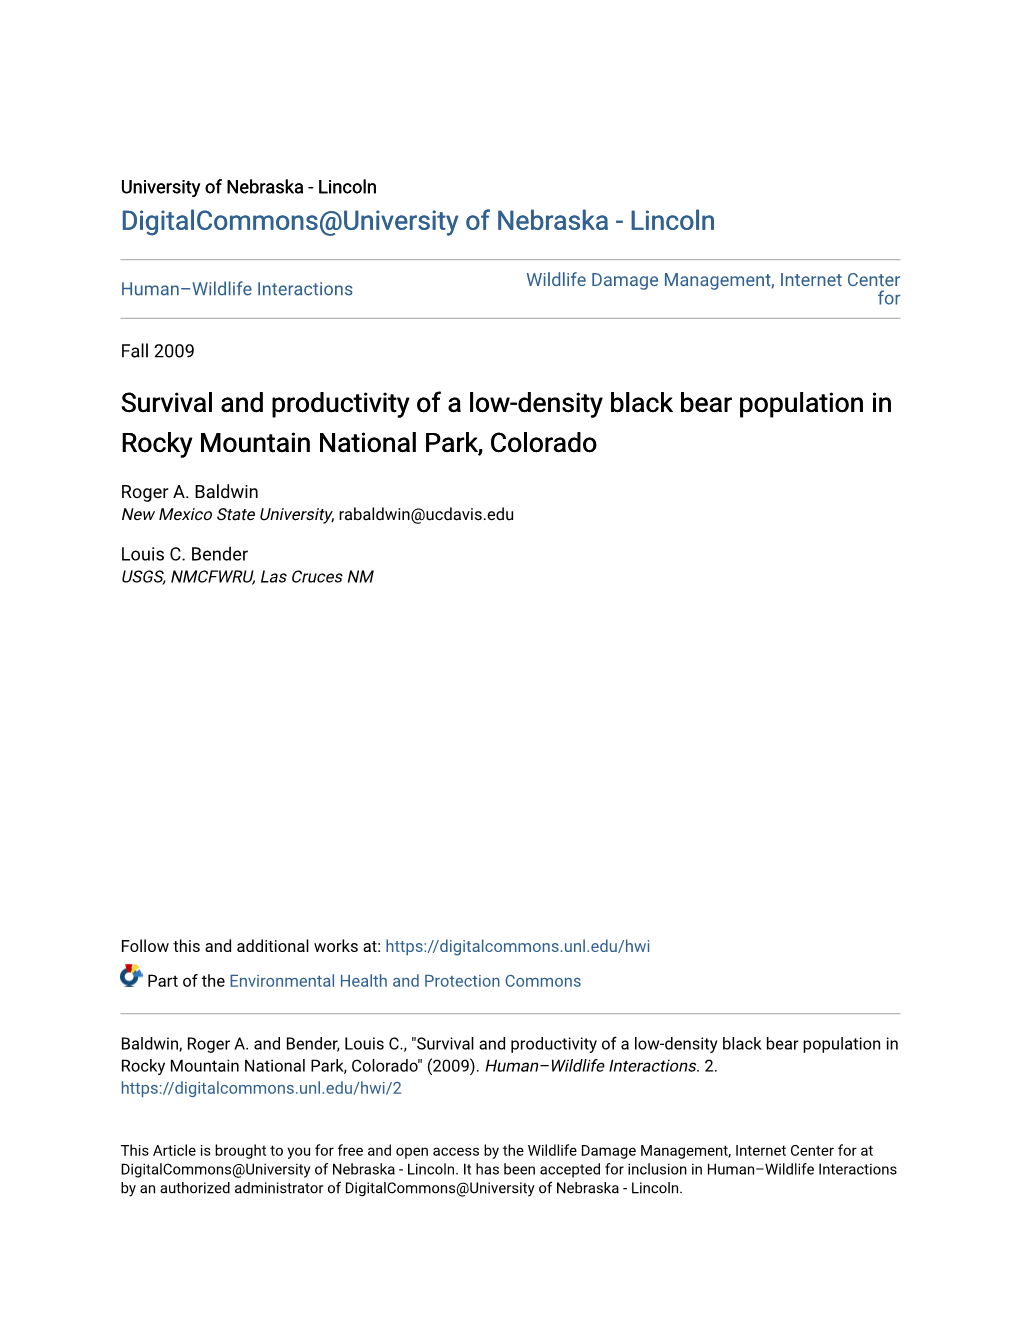 Survival and Productivity of a Low-Density Black Bear Population in Rocky Mountain National Park, Colorado